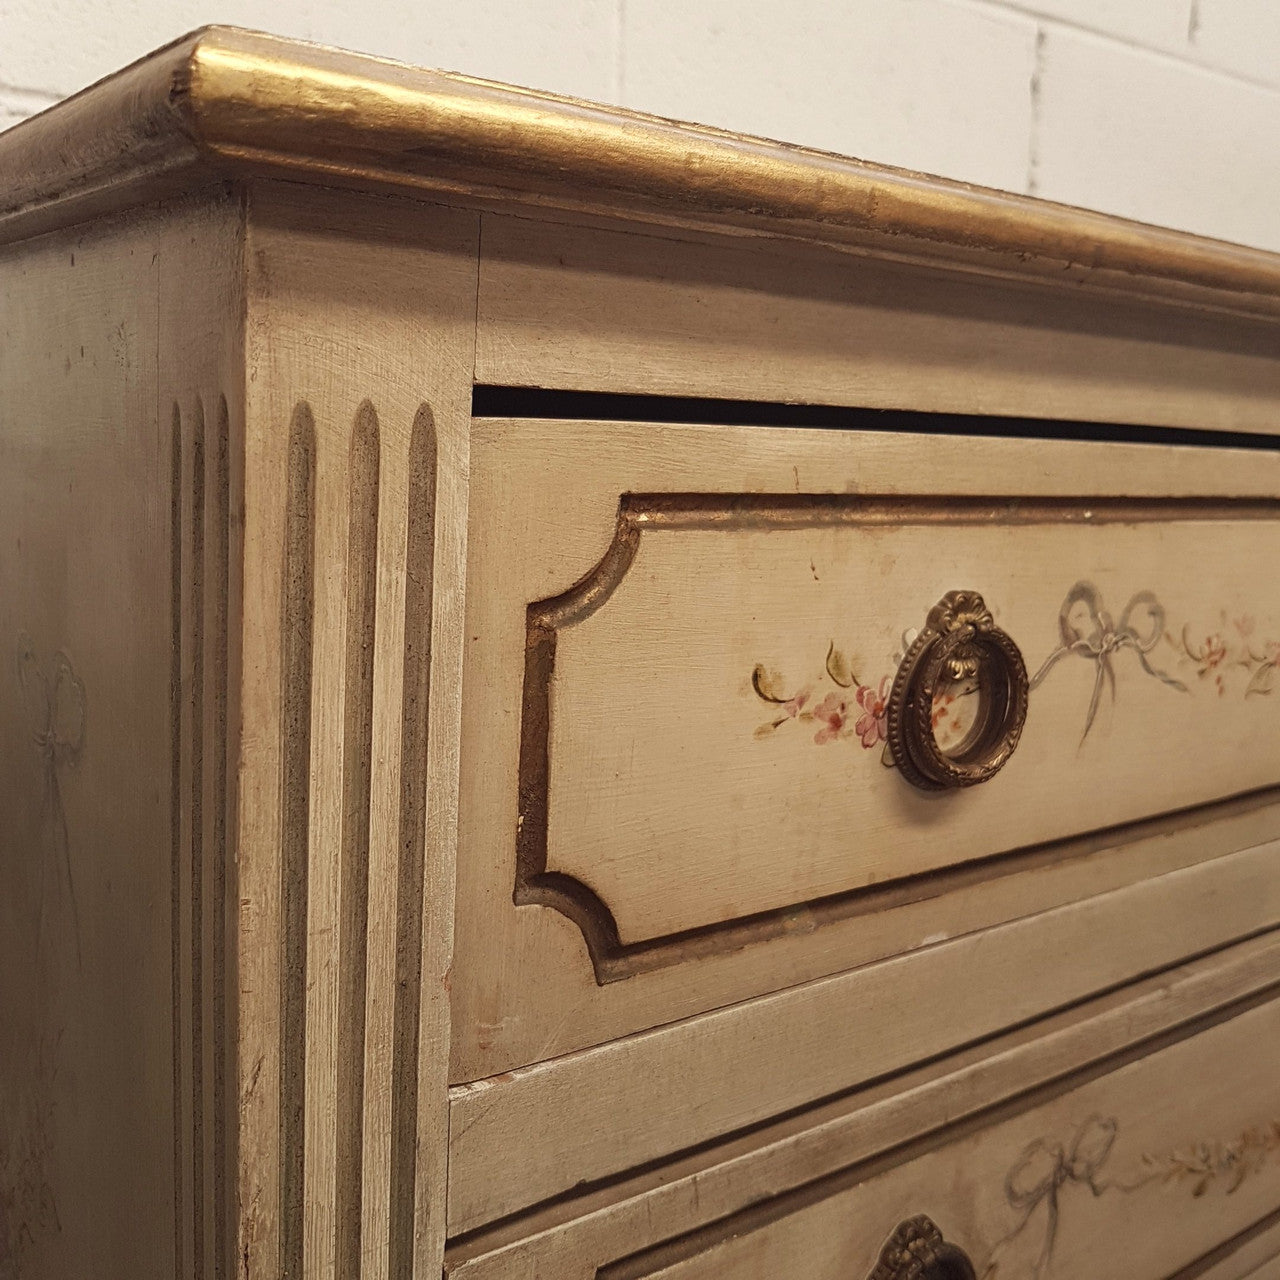 Stunning French Hand Painted Commode